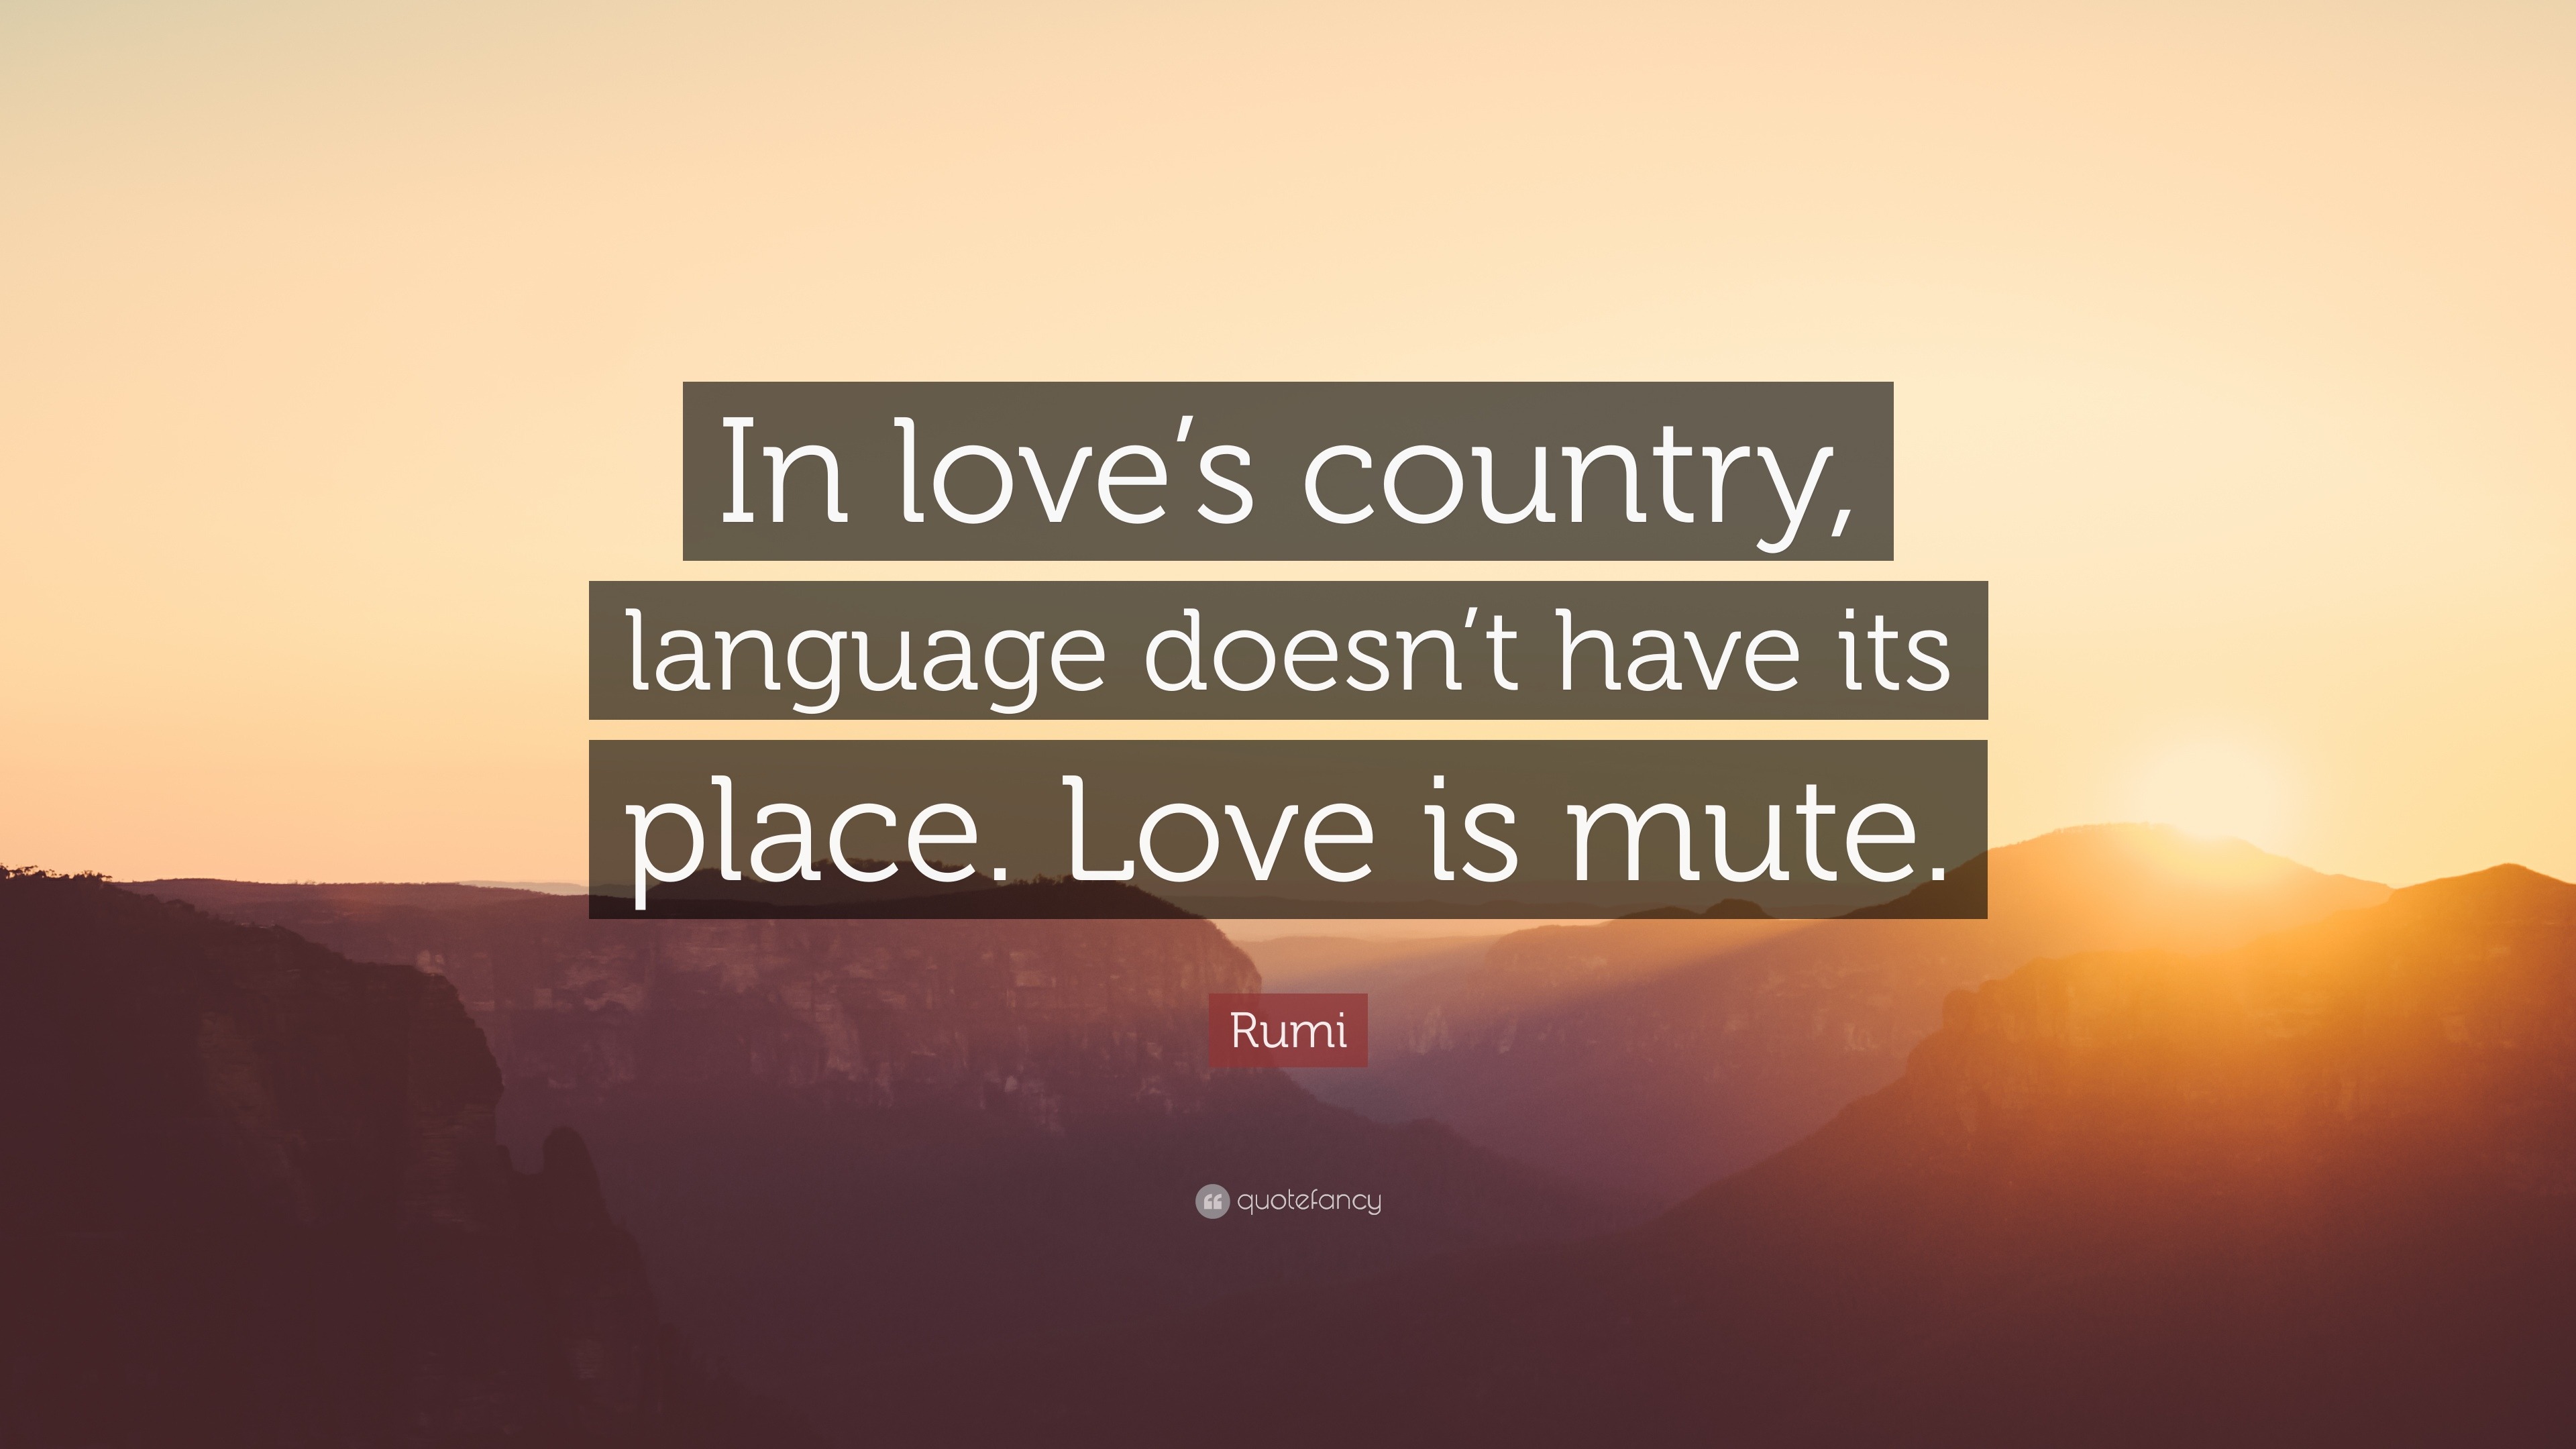 Rumi Quote: "In love's country, language doesn't have its place. Love is mute." (12 wallpapers ...